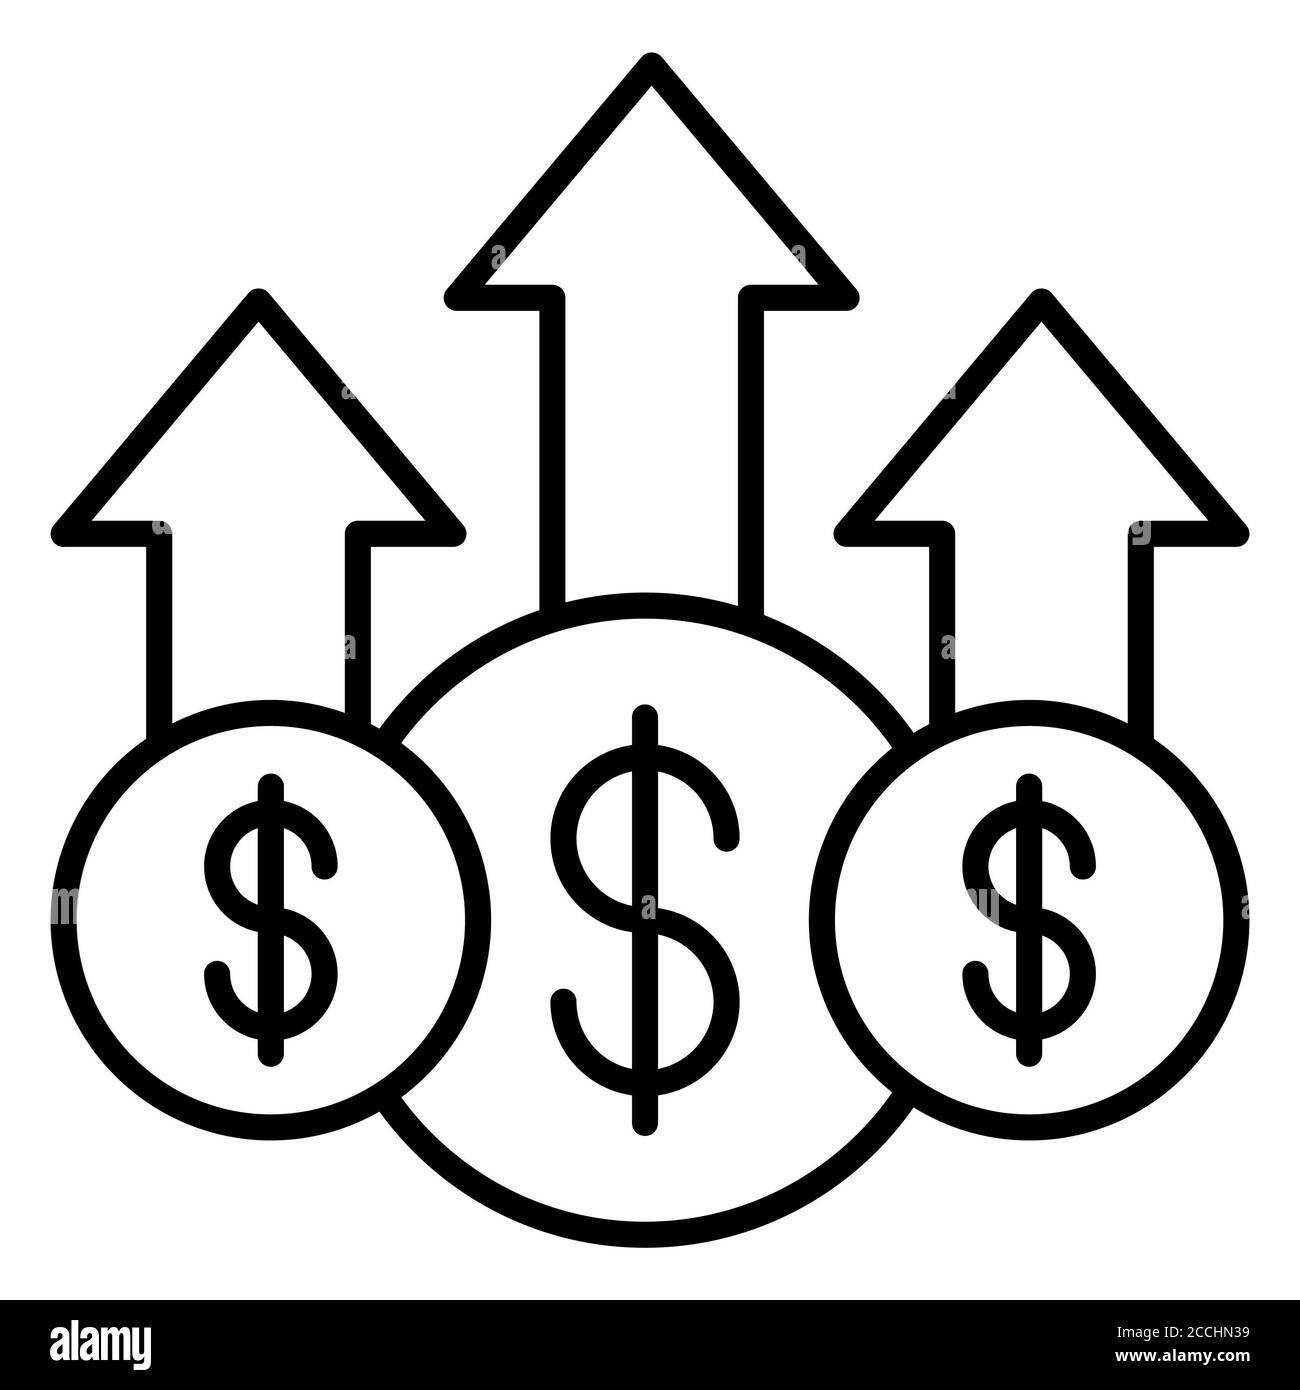 Money Growth Consulting Line Icon Stock Photo